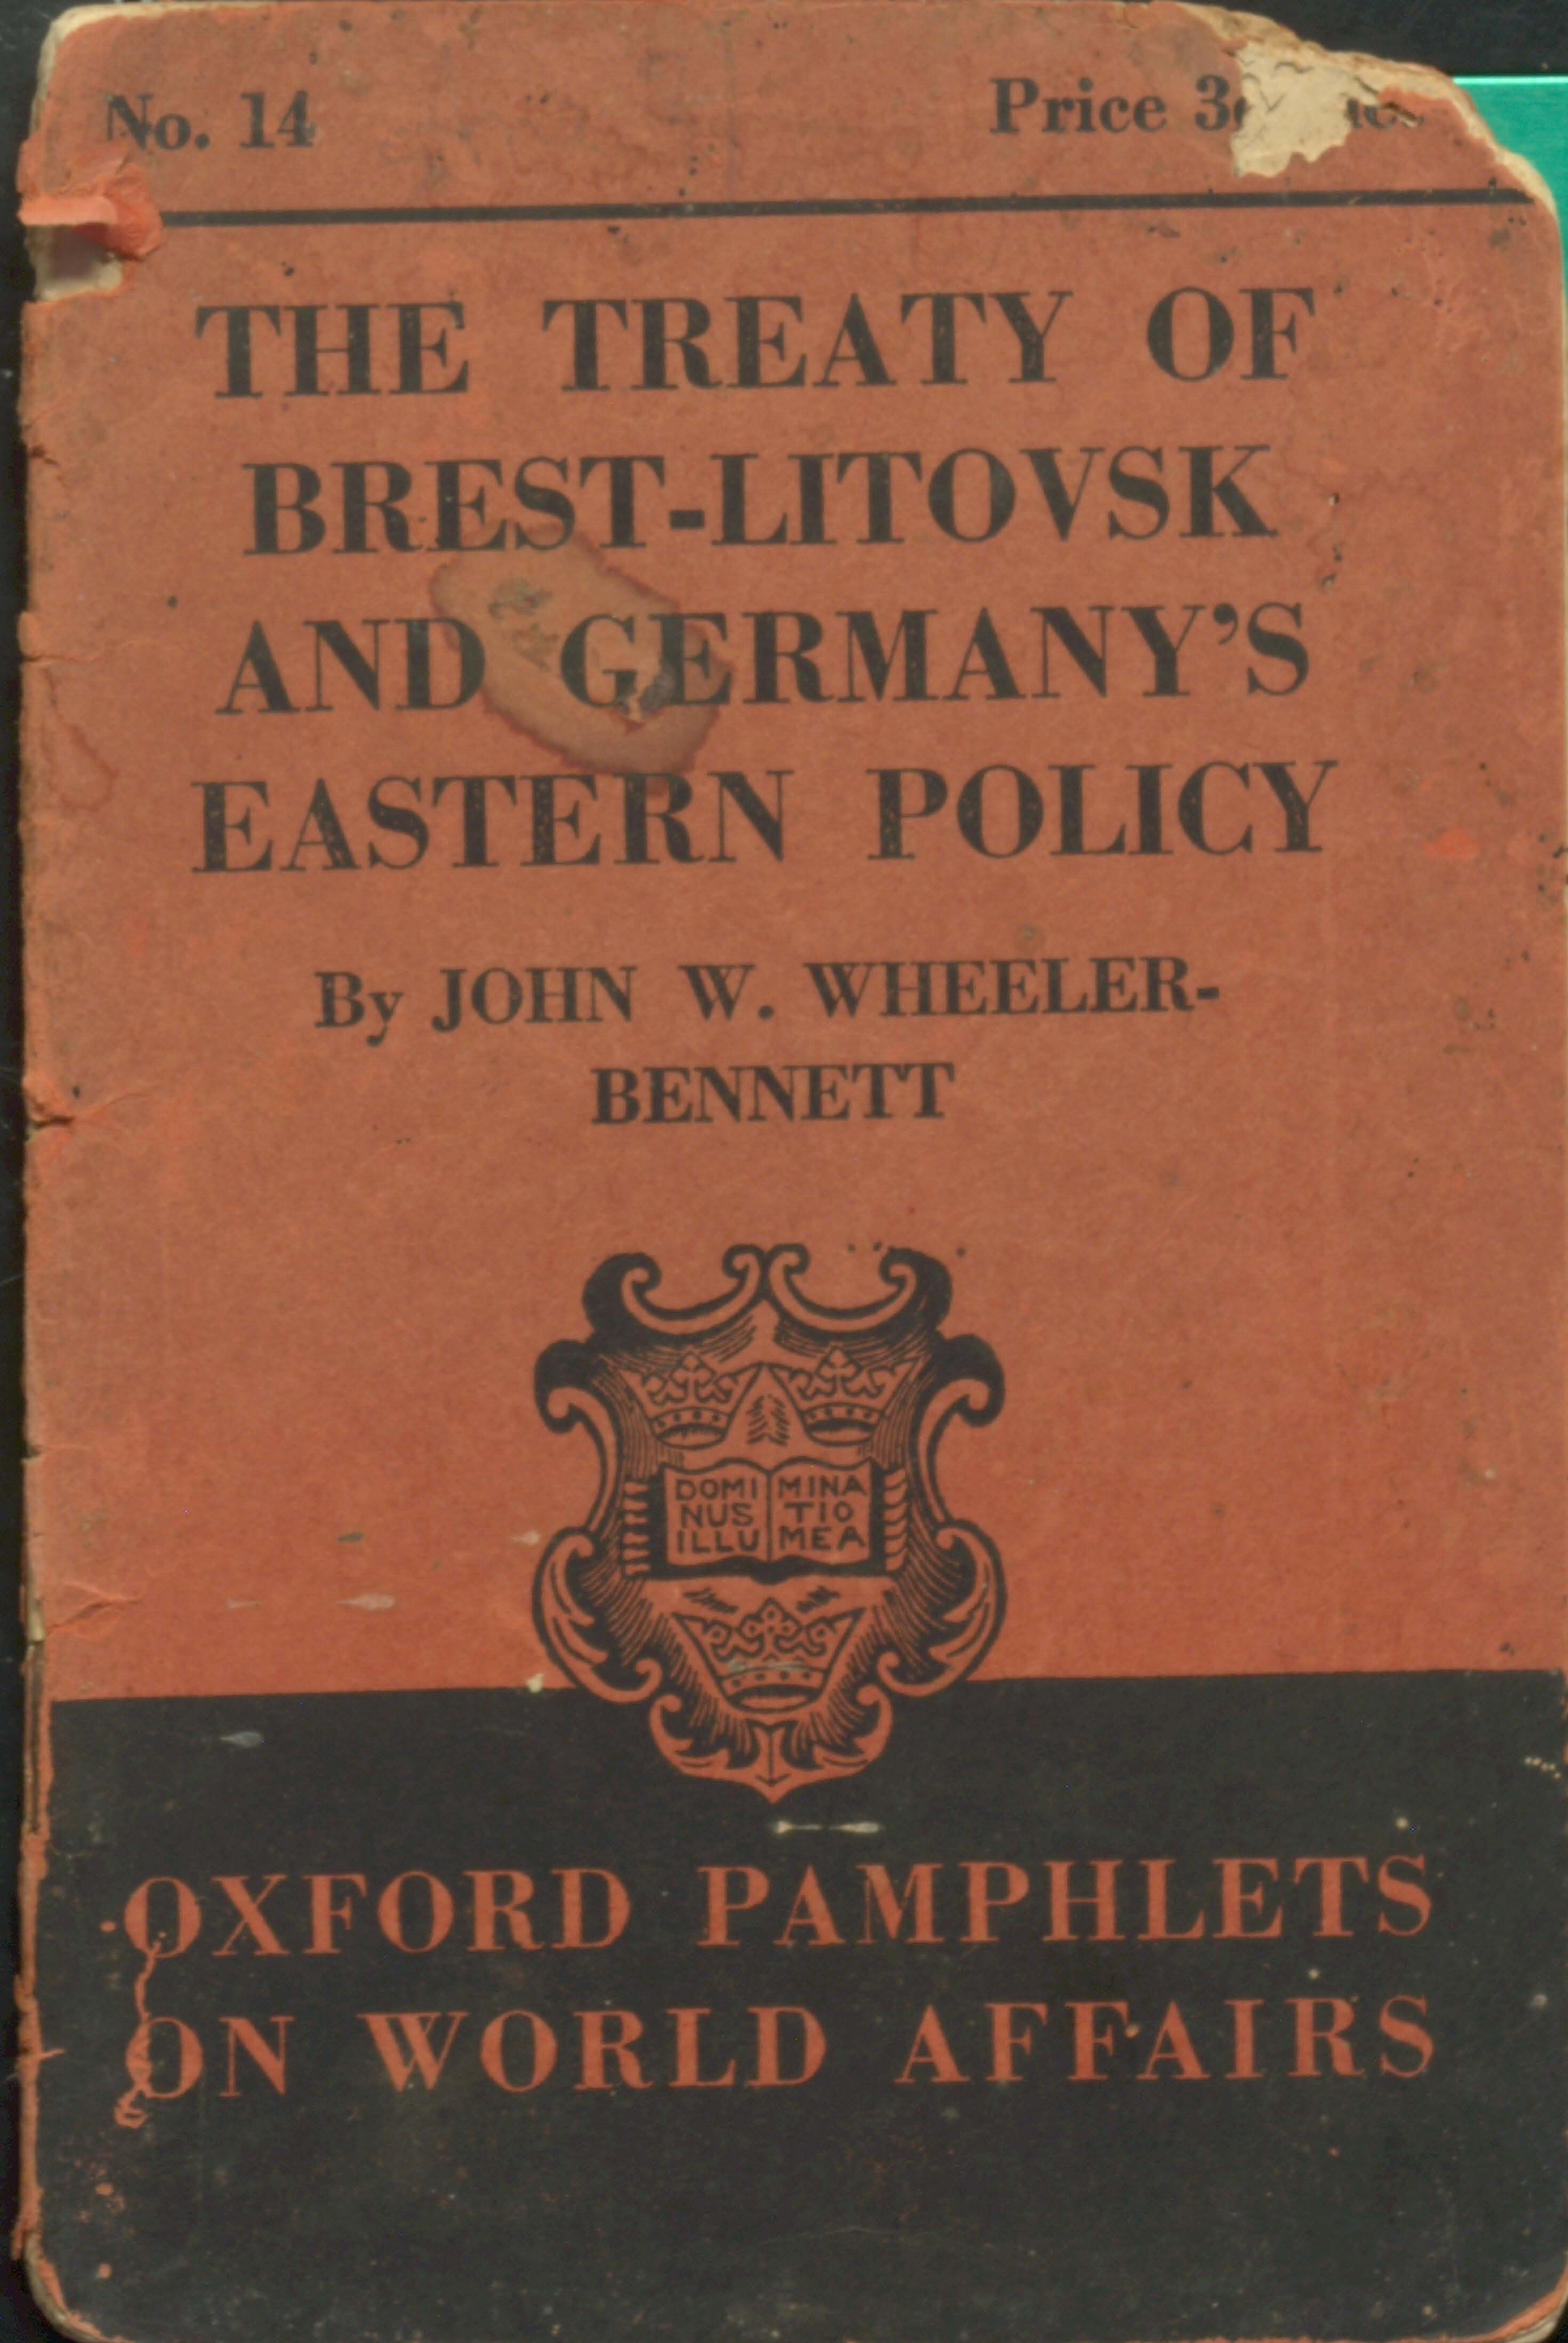 The treaty of brest-litovsk and germany's eastern policy